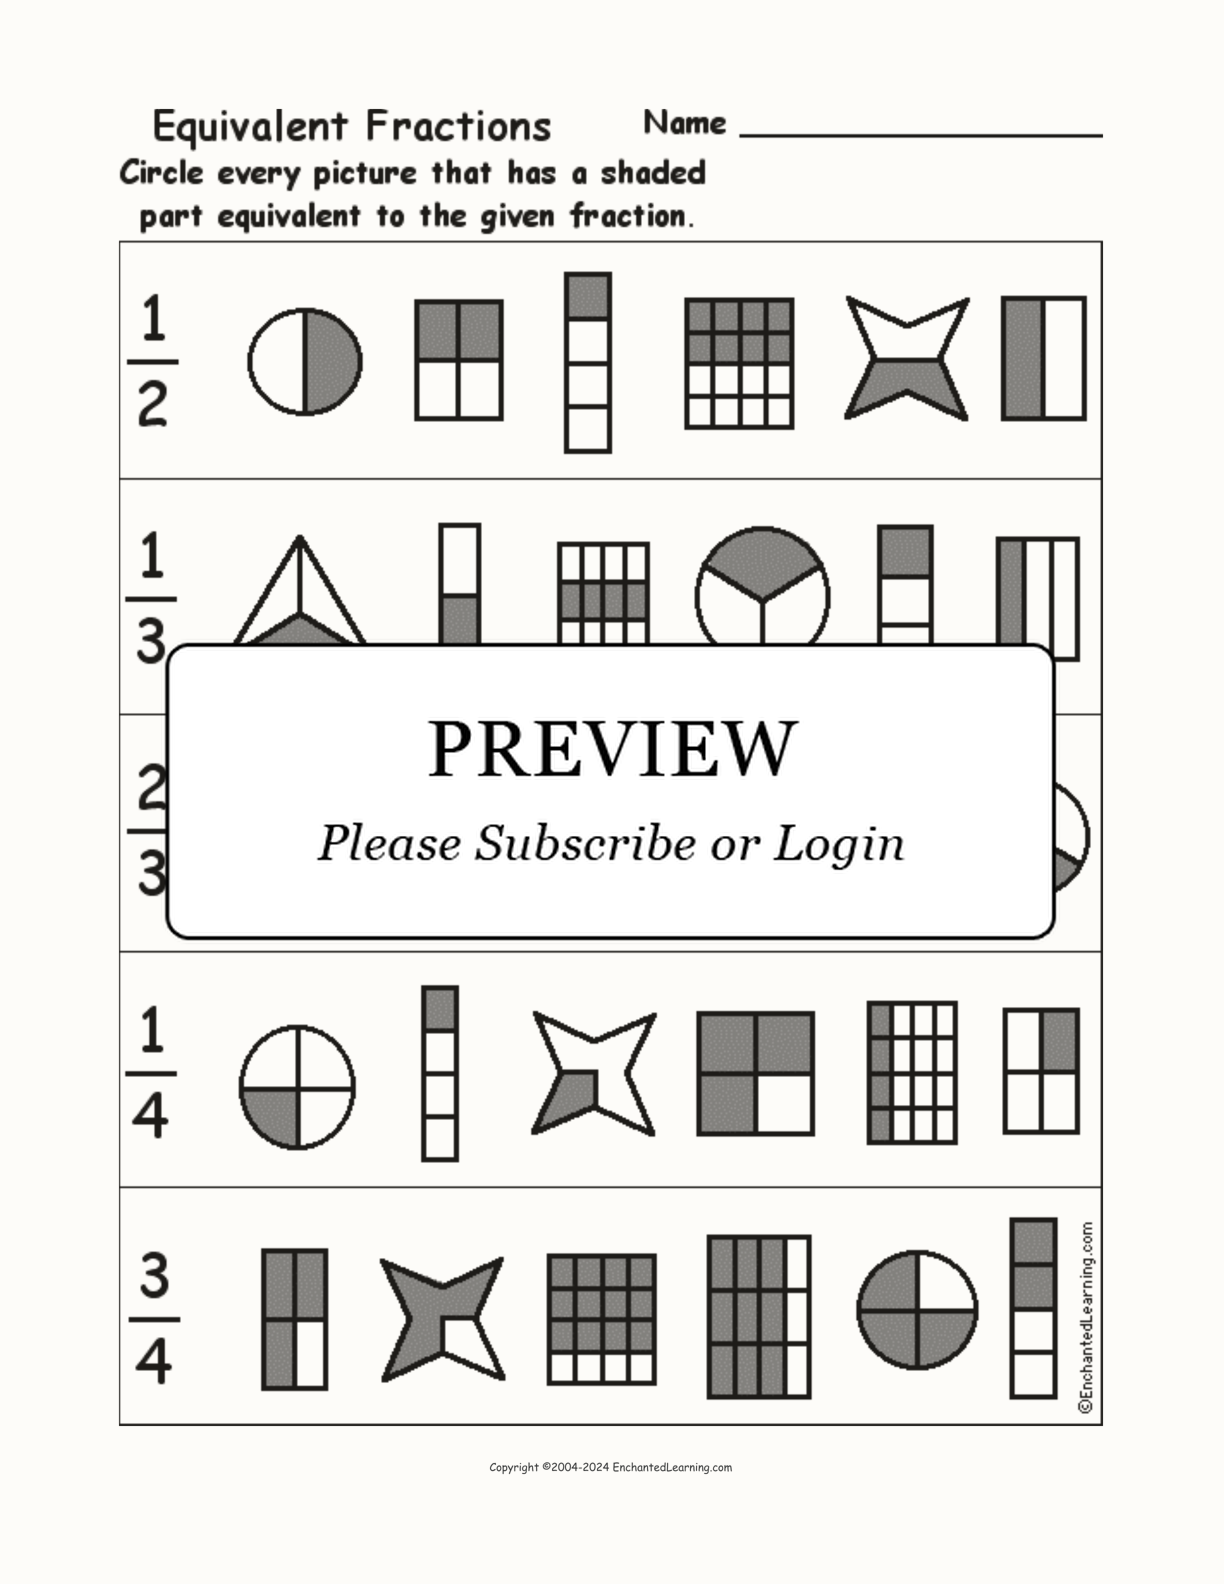 Equivalent Fractions interactive worksheet page 1